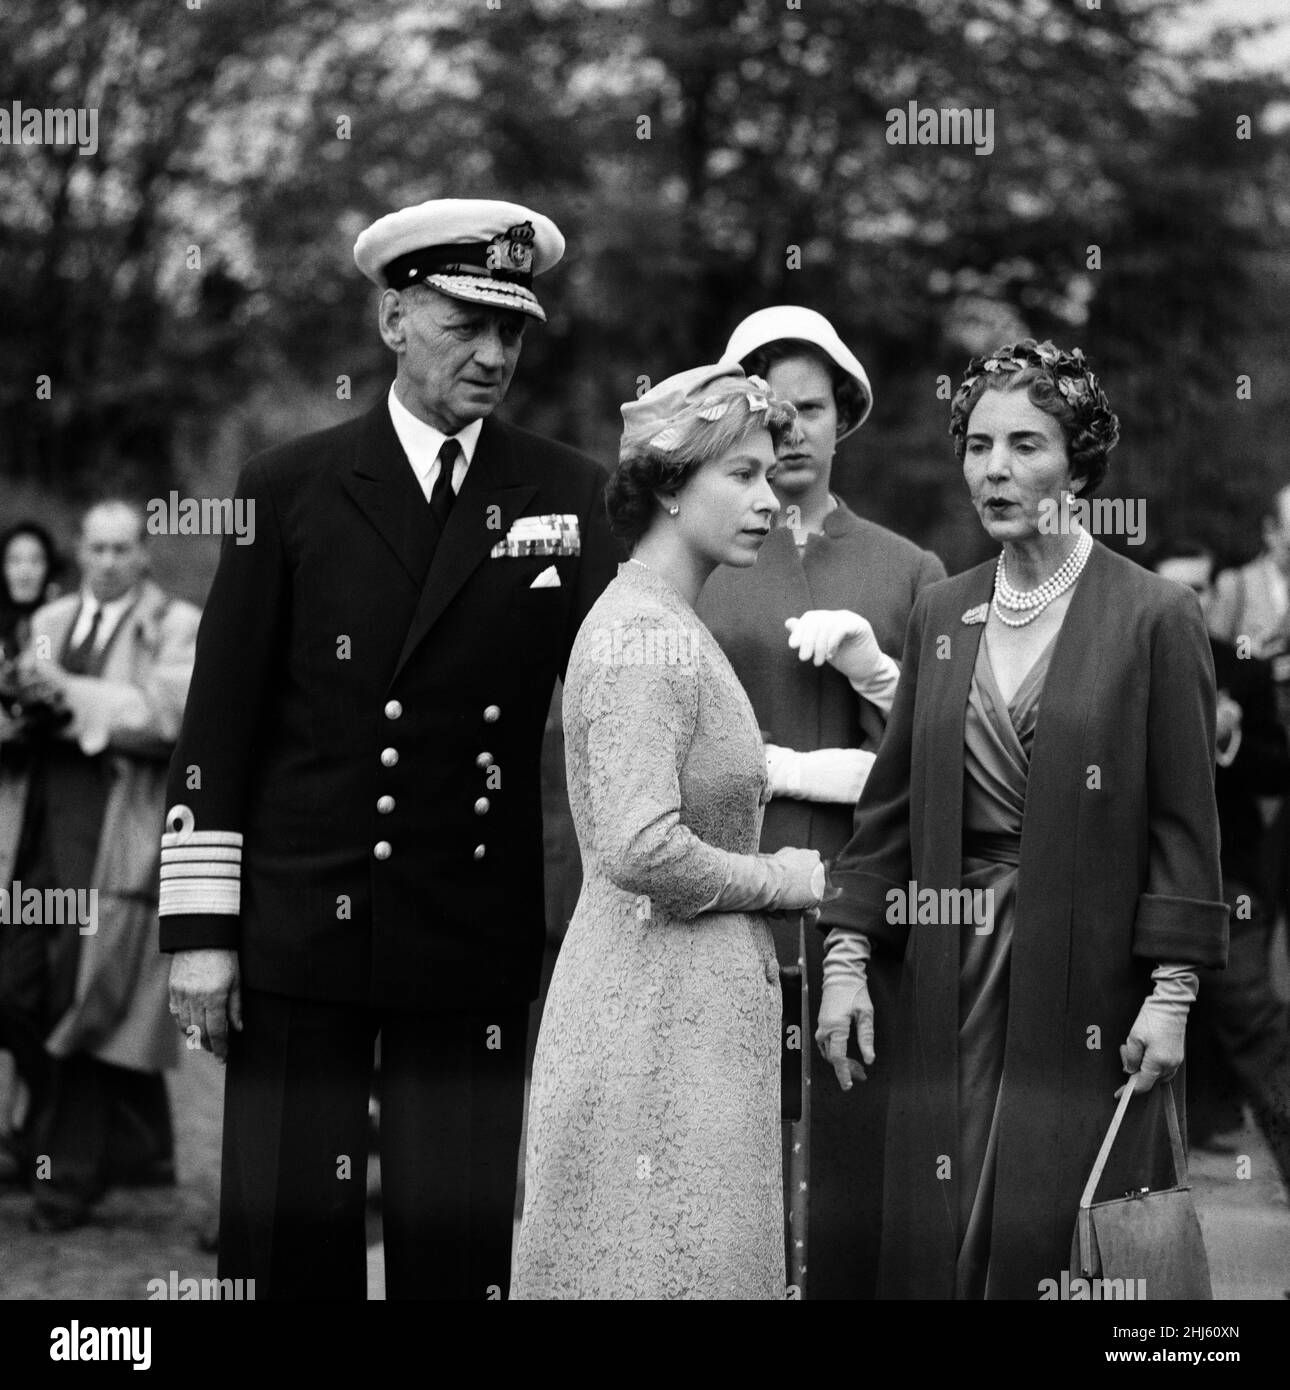 Queen Elizabeth II and Prince Philip, Duke of Edinburgh visit to Denmark. Pictured during a visit to the Memorial cemetery to the resistance movement are King Frederik IX of Denmark, Queen Elizabeth II, Danish Princess Margrethe and Queen Ingrid. 23rd May 1957. Stock Photo